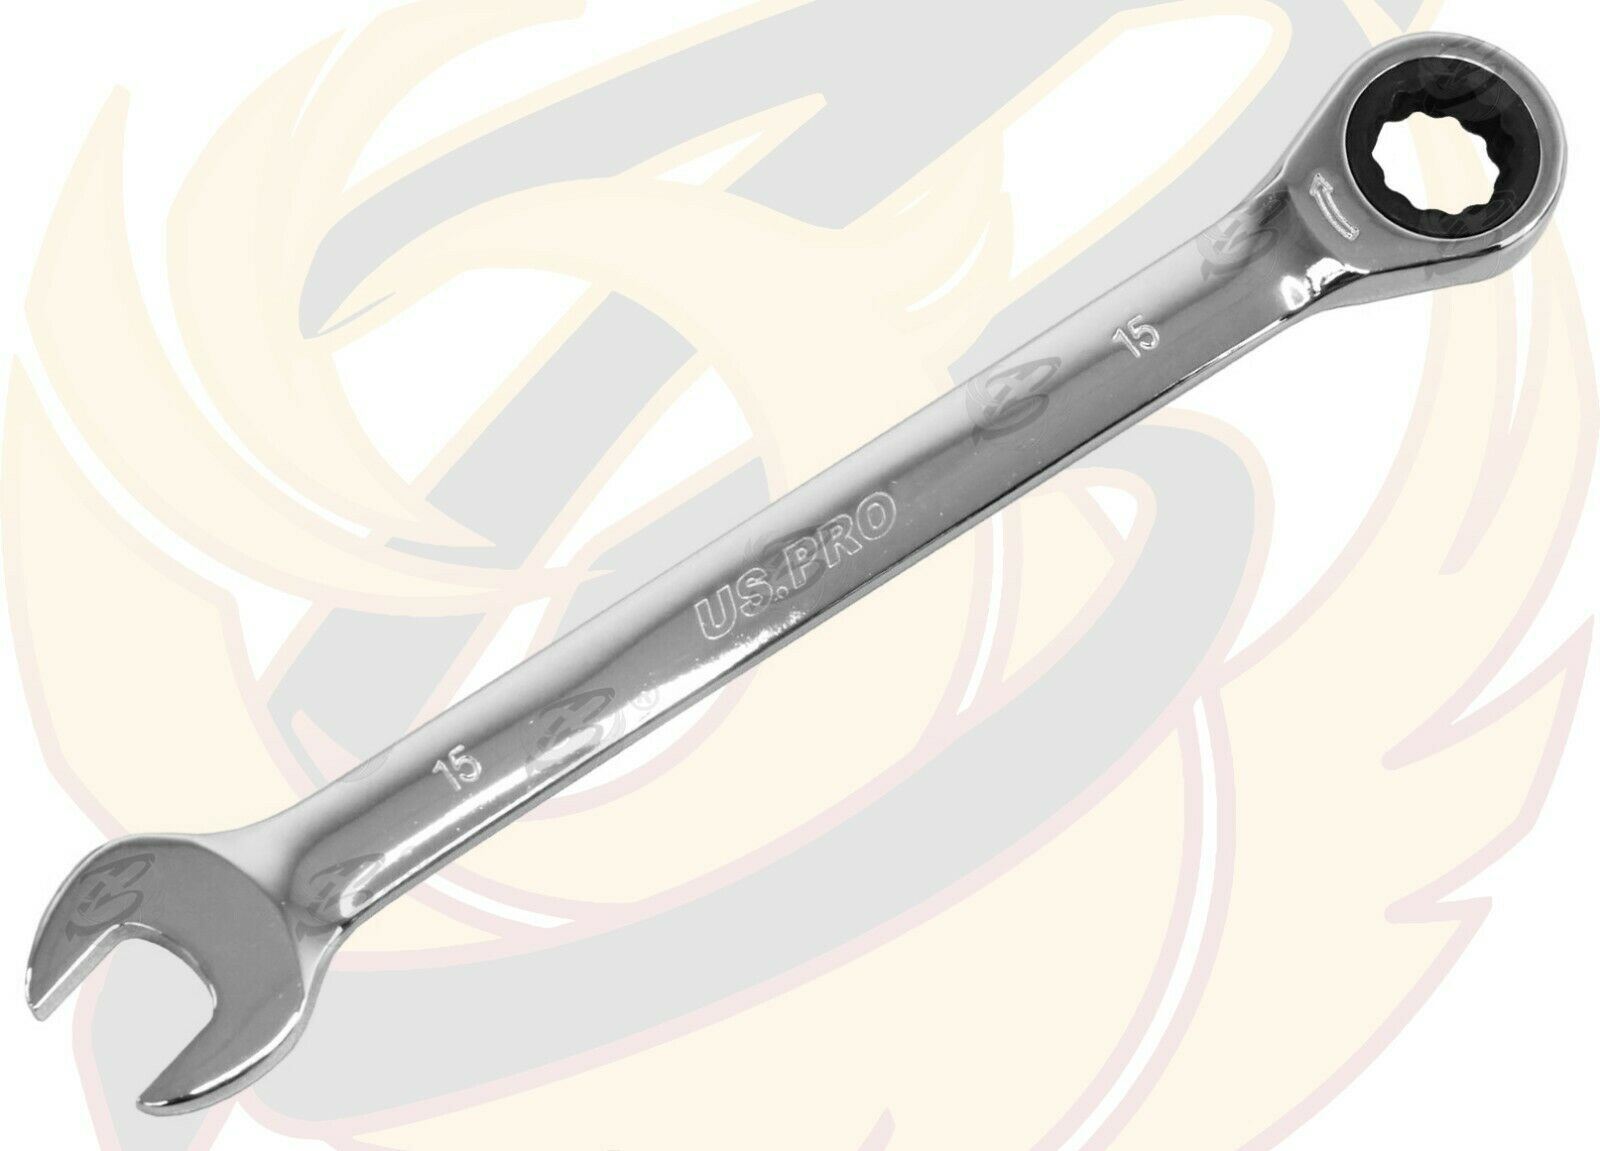 US PRO 15MM 72 TOOTH RATCHET SPANNER